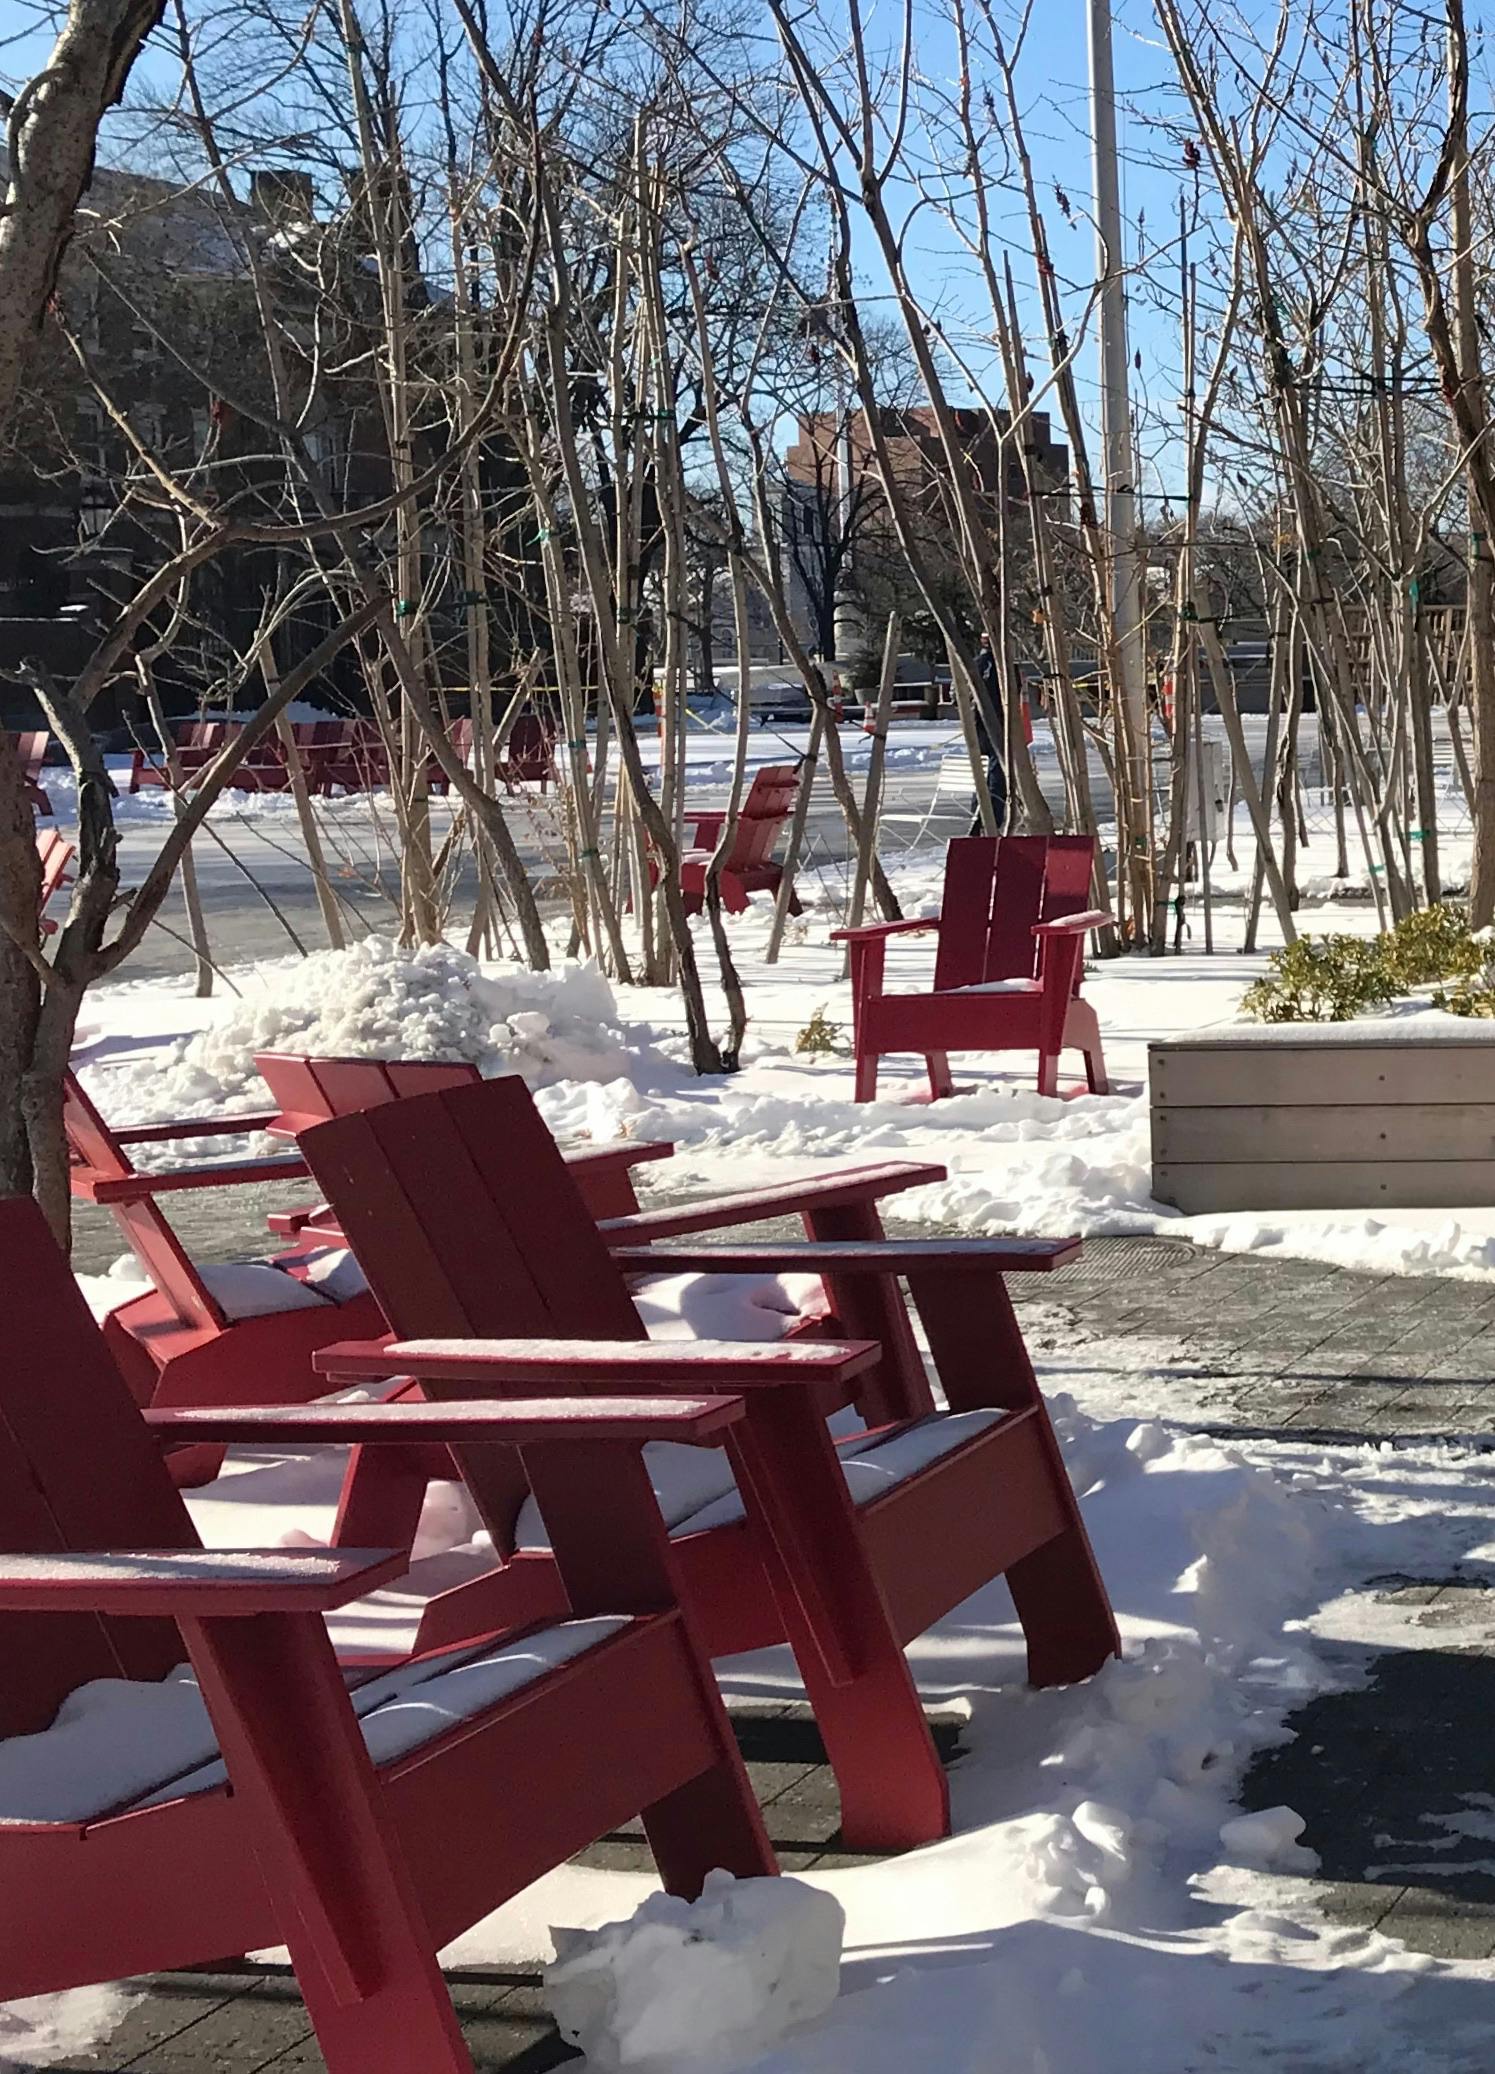 Free stock photo of armchairs, red armchair, snow